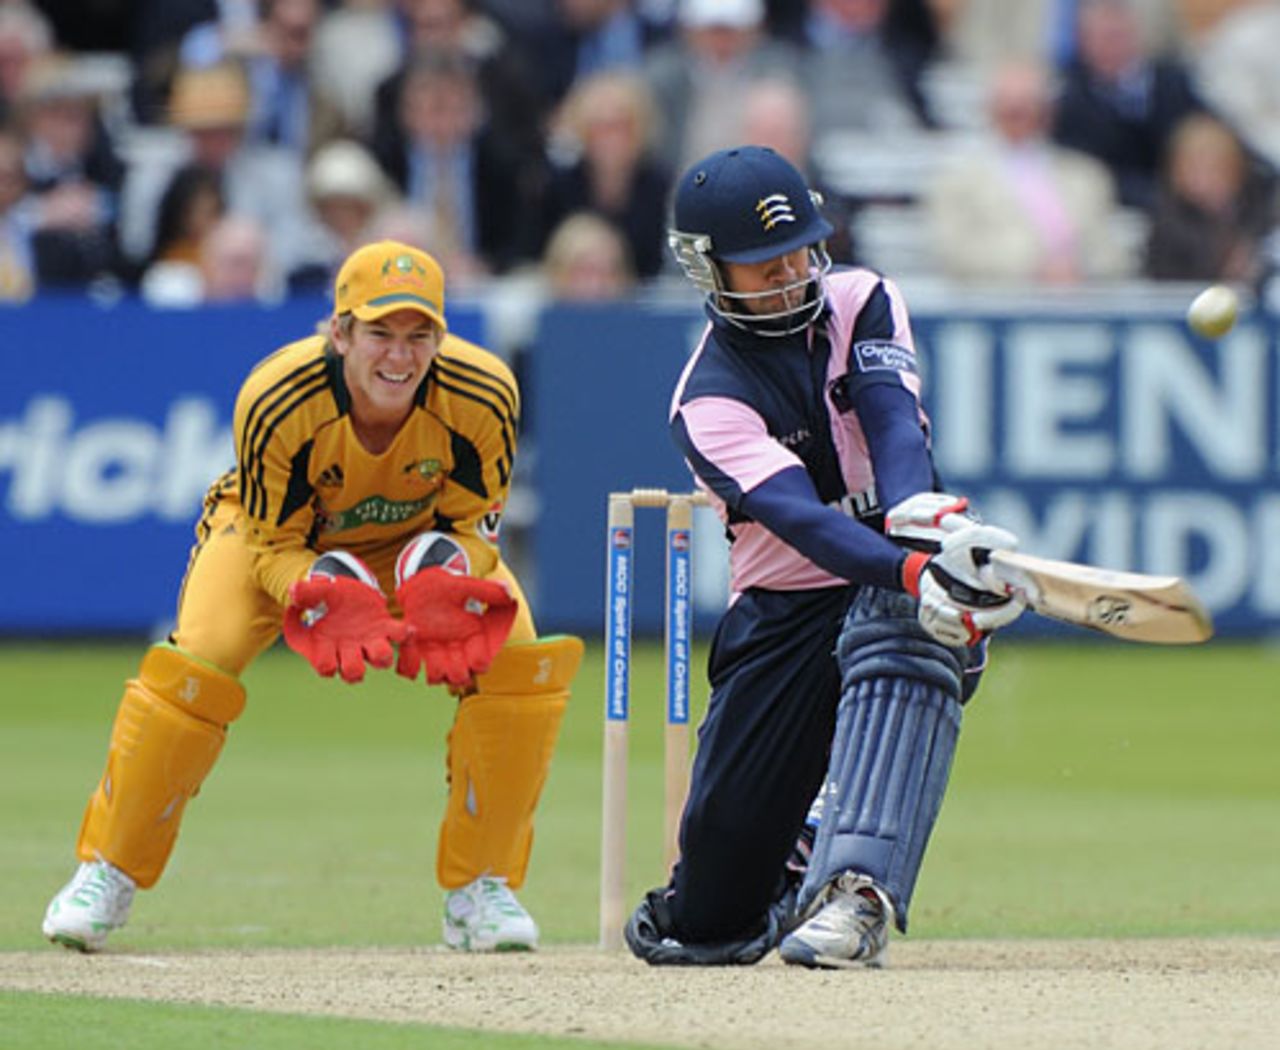 Owais Shah struck eight fours and a six during his 92, Middlesex v Australians, Tour Match, Lord's, June 19, 2010